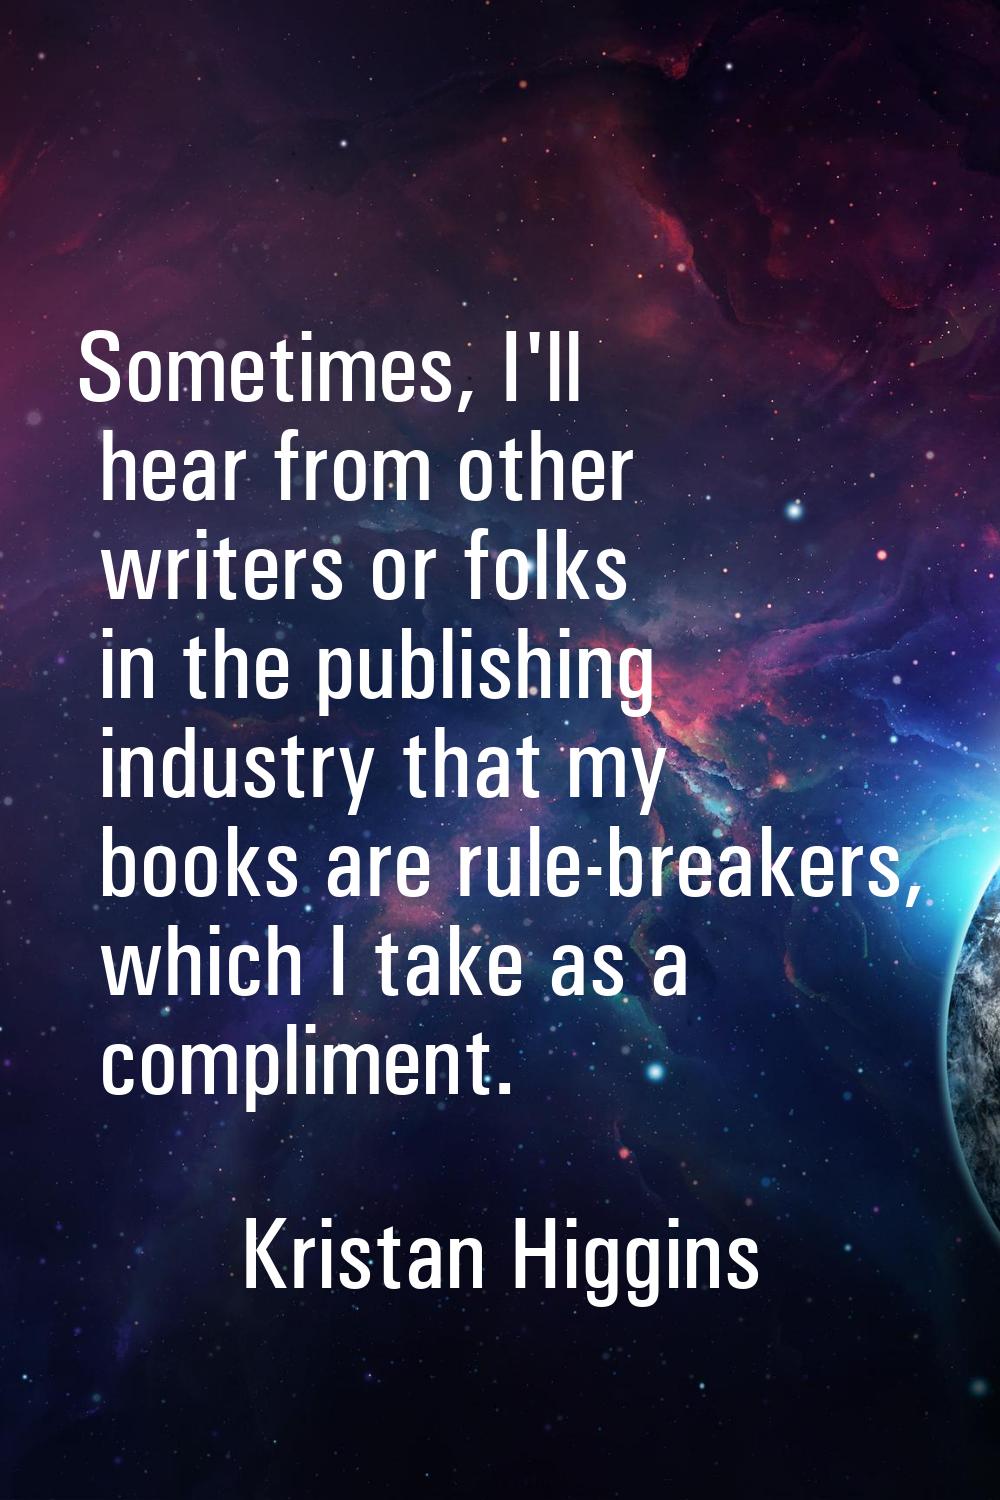 Sometimes, I'll hear from other writers or folks in the publishing industry that my books are rule-